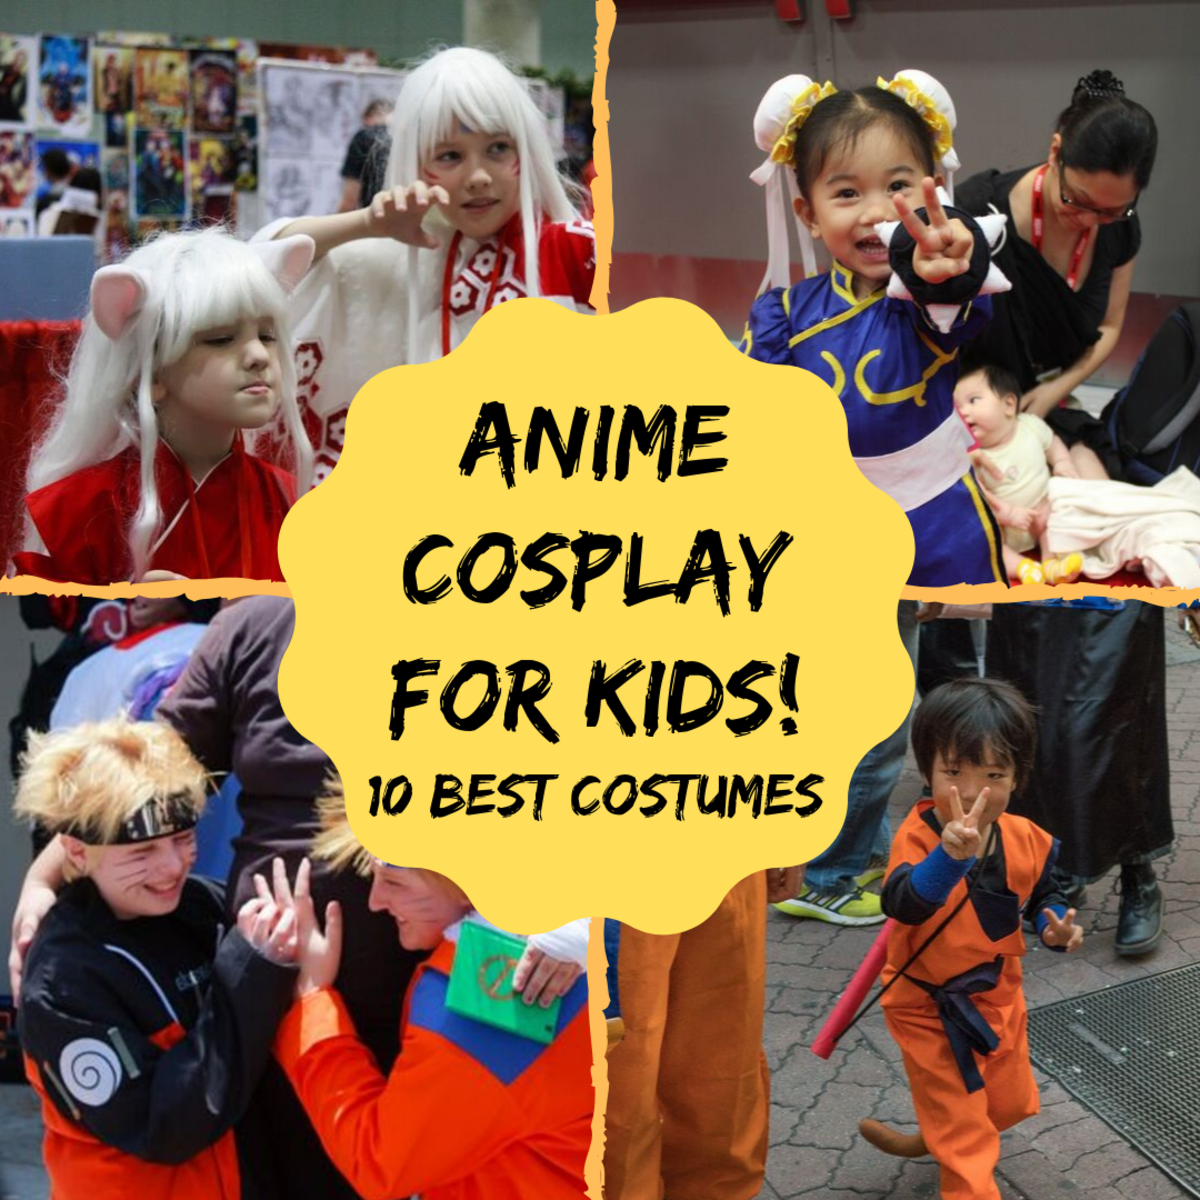 Check out some of the best cosplay ideas for kids who love anime! (Clockwise from top left: Inuyasha, Chun Li, Gohan or Goku, and Naruto.)